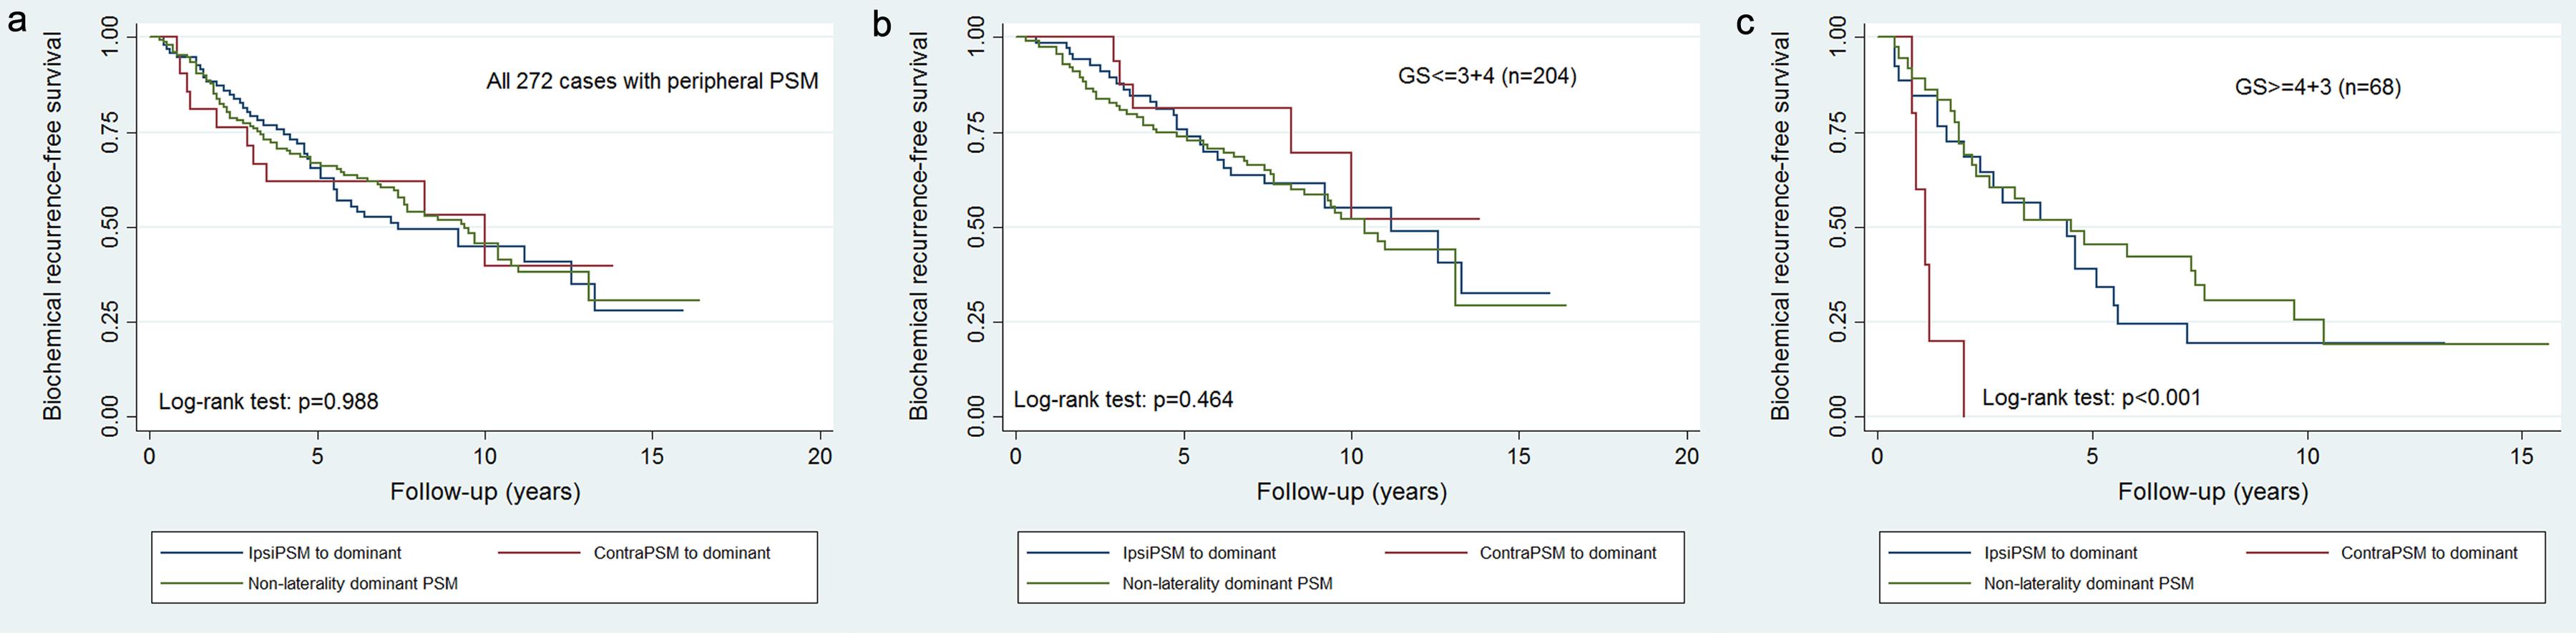 Kaplan-Meier curves showing biochemical recurrence-free survival stratified by same side PSM to dominant tumor vs contralateral PSM to dominant tumor vs non-laterality dominant PSM in all 272 cases with peripheral PSM(a), 204 cases with peripheral PSM and low-risk PCa (GS≤3+4) (b) and 68 cases with peripheral PSM and high-risk PCa (GS≥4+3) (c).